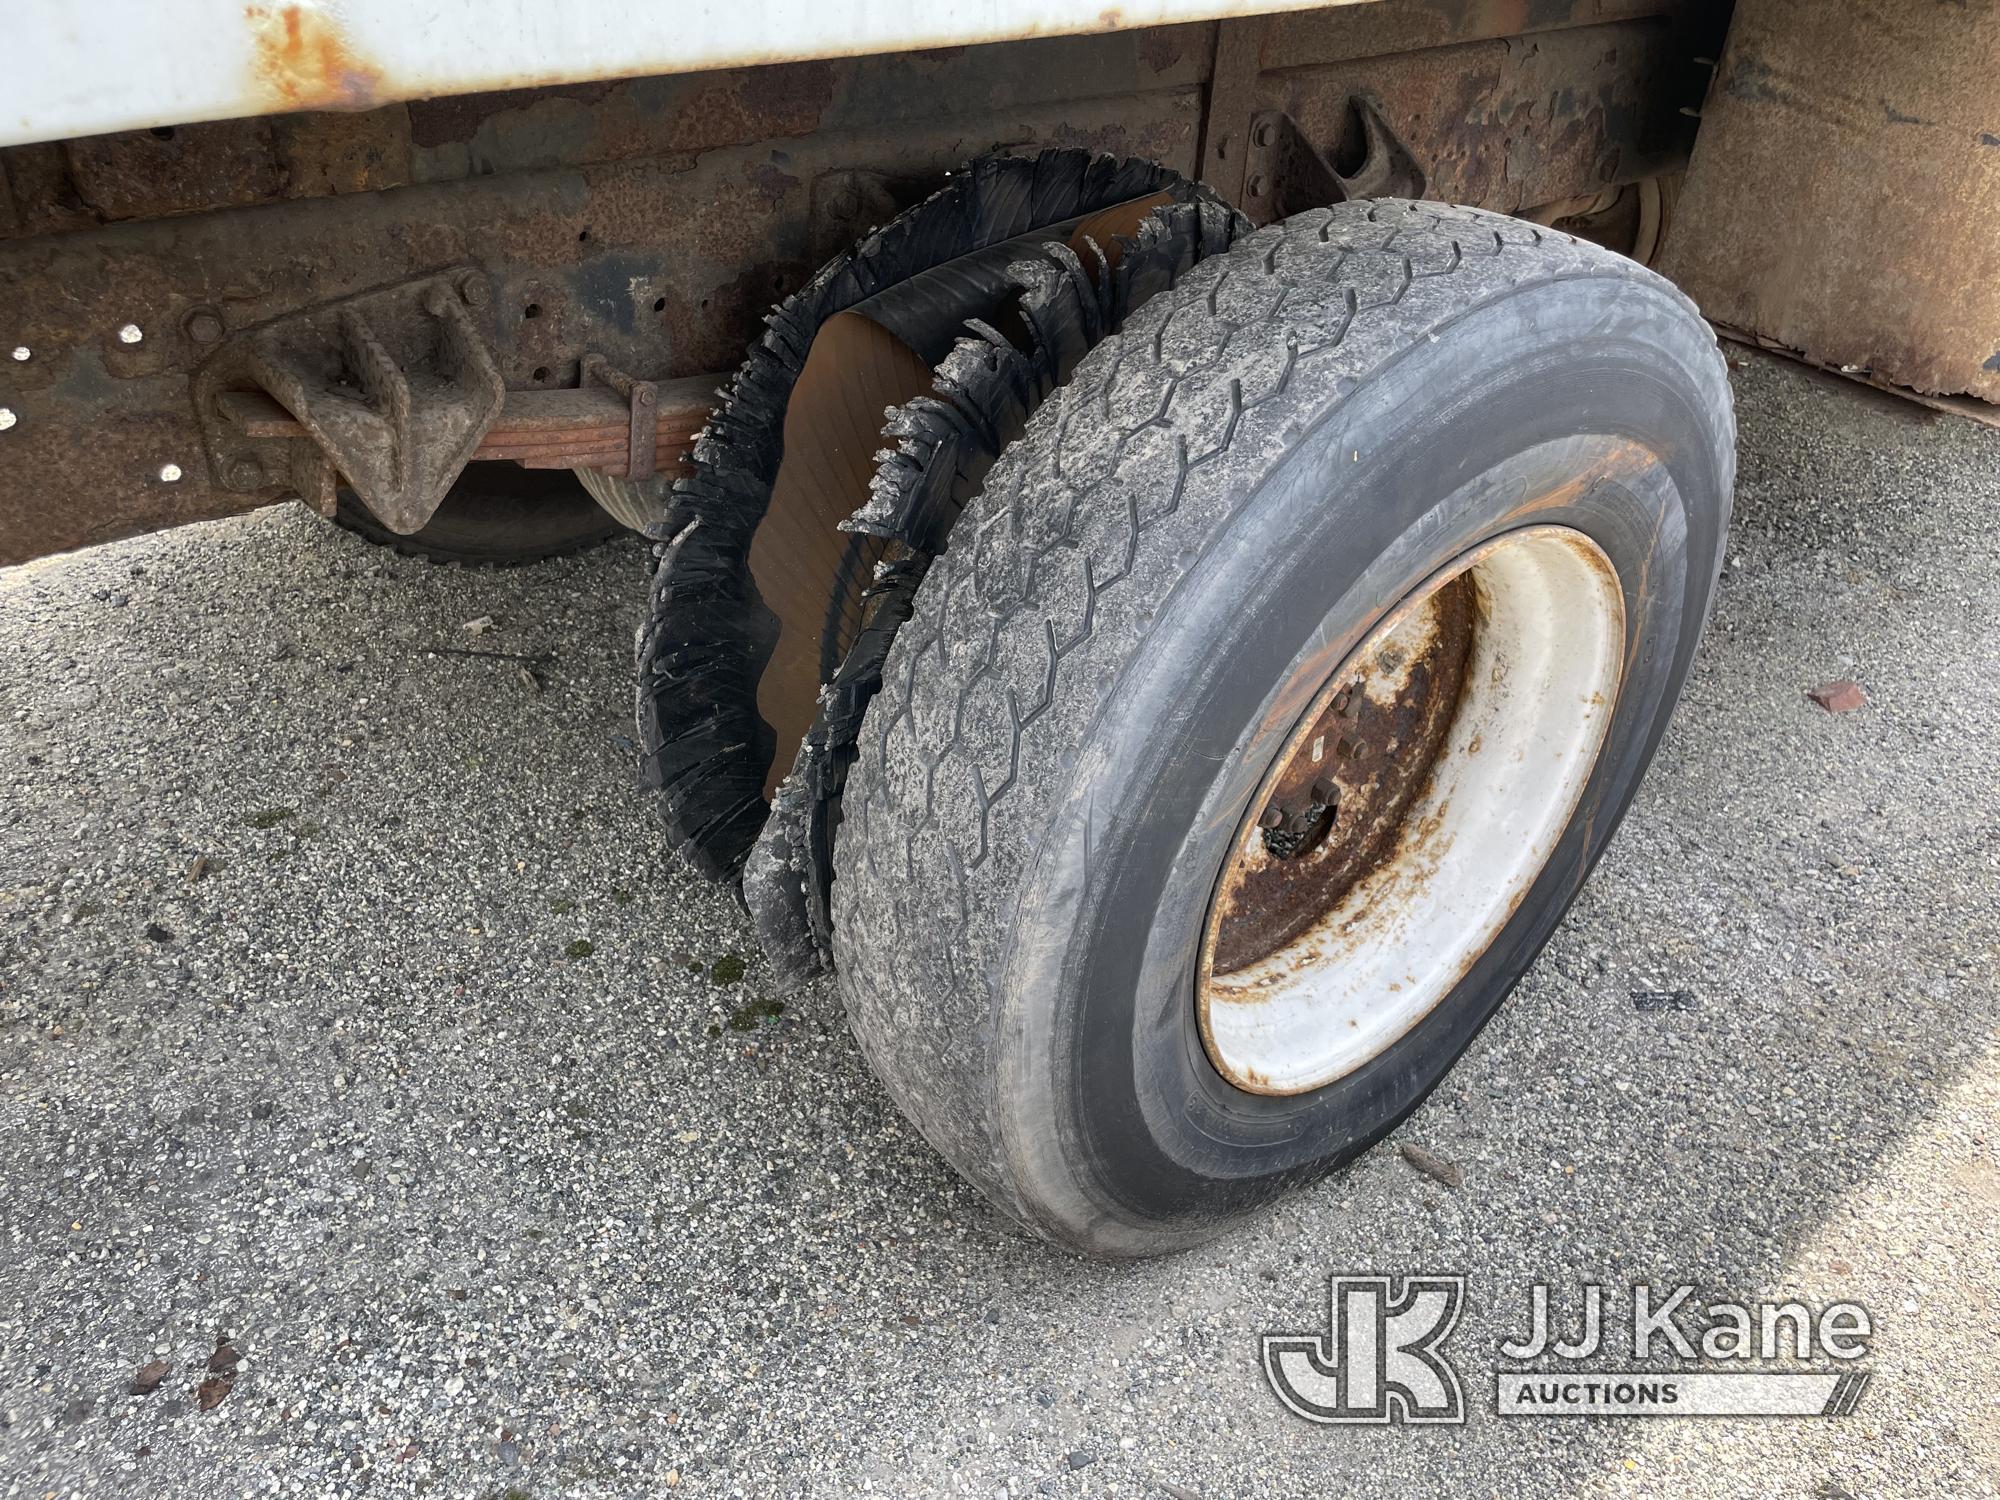 (Plymouth Meeting, PA) 2005 International 4300 Chipper Dump Truck Not Running Condition Unknown, Dri